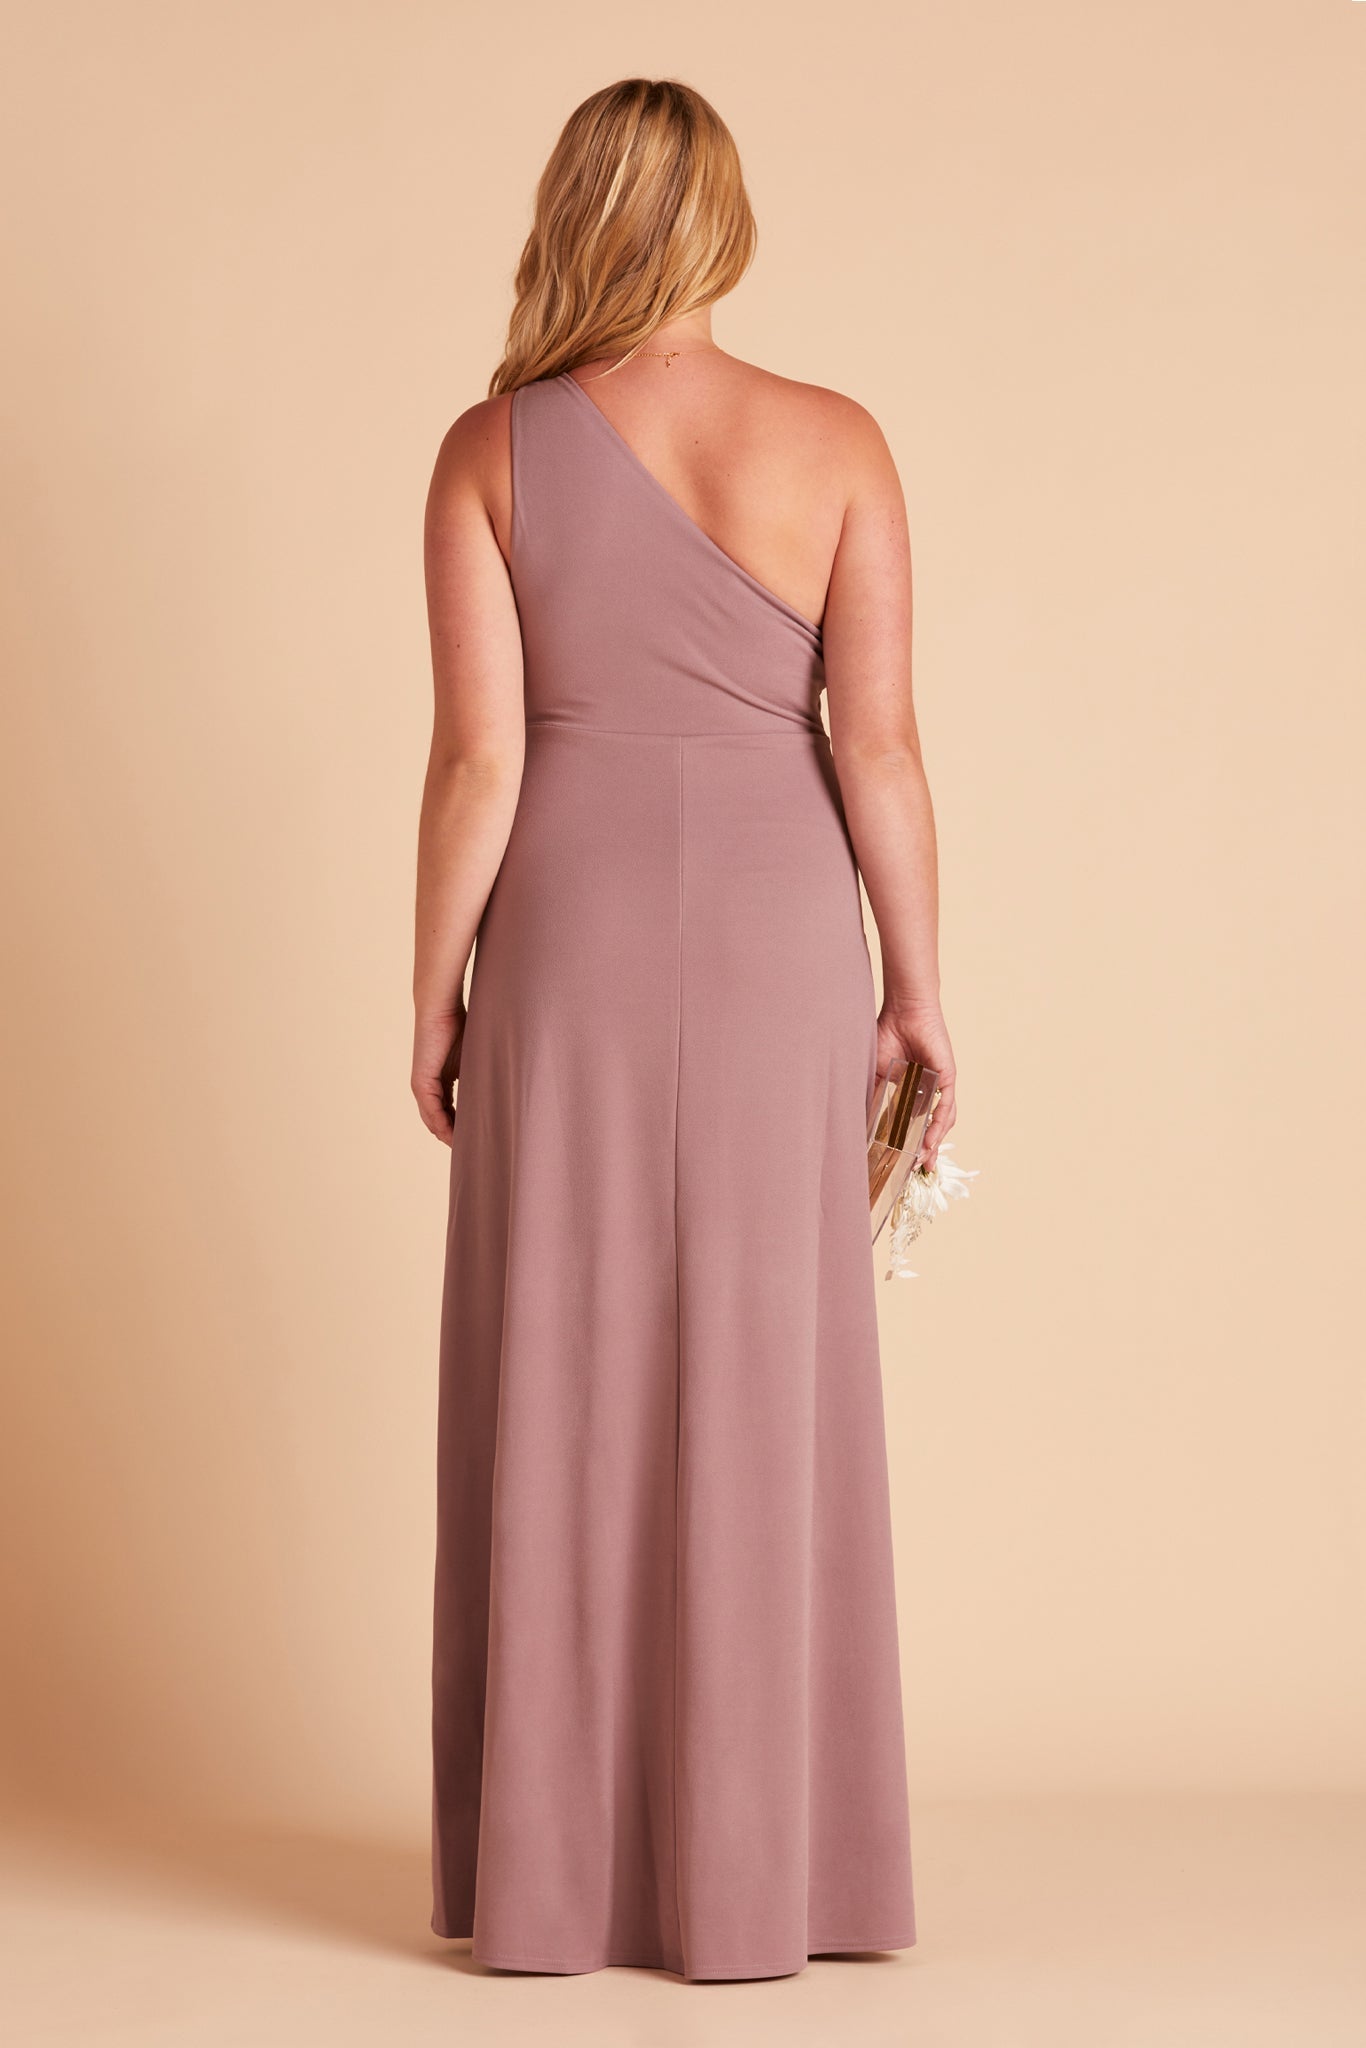 Kira plus size bridesmaid dress with slit in dark mauve crepe by Birdy Grey, back view